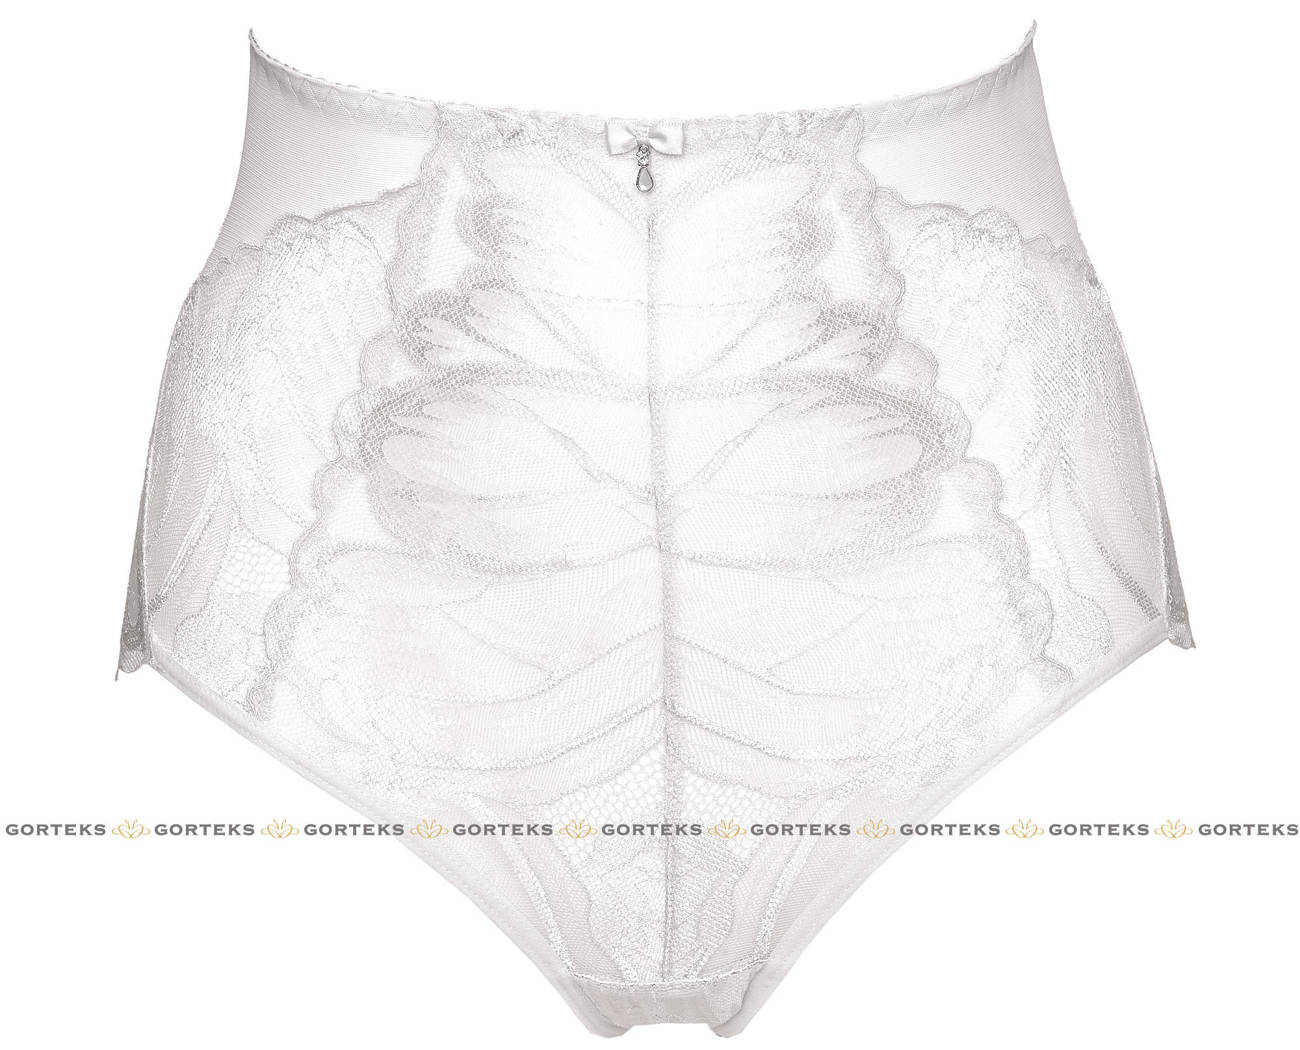 Gorteks Moon lace panty silver silver Spring-summer 2022 collection